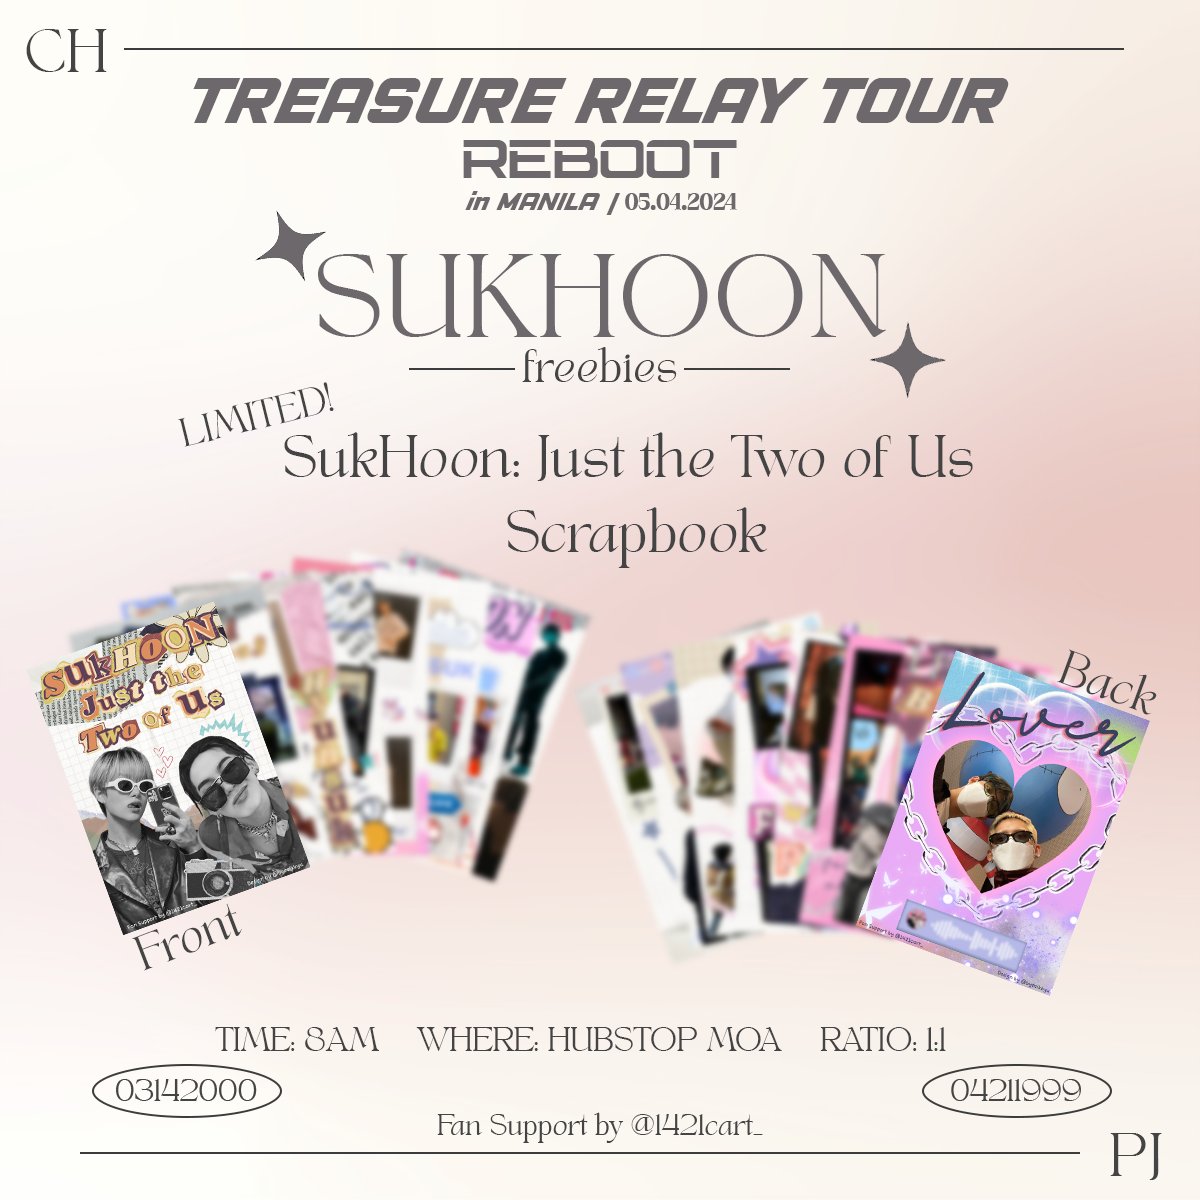 freebie previews ✨

      ❝ SukHoon : Just the Two of Us ❞
                    Limited Scrapbook

ೃ⁀➷ a 7-pages back to back taylor swift songs inspired scrapbook to be given to selected sukhoonists only.

— see 📌 to check out more freebies

#TREASURE_REBOOT_IN_MANILA